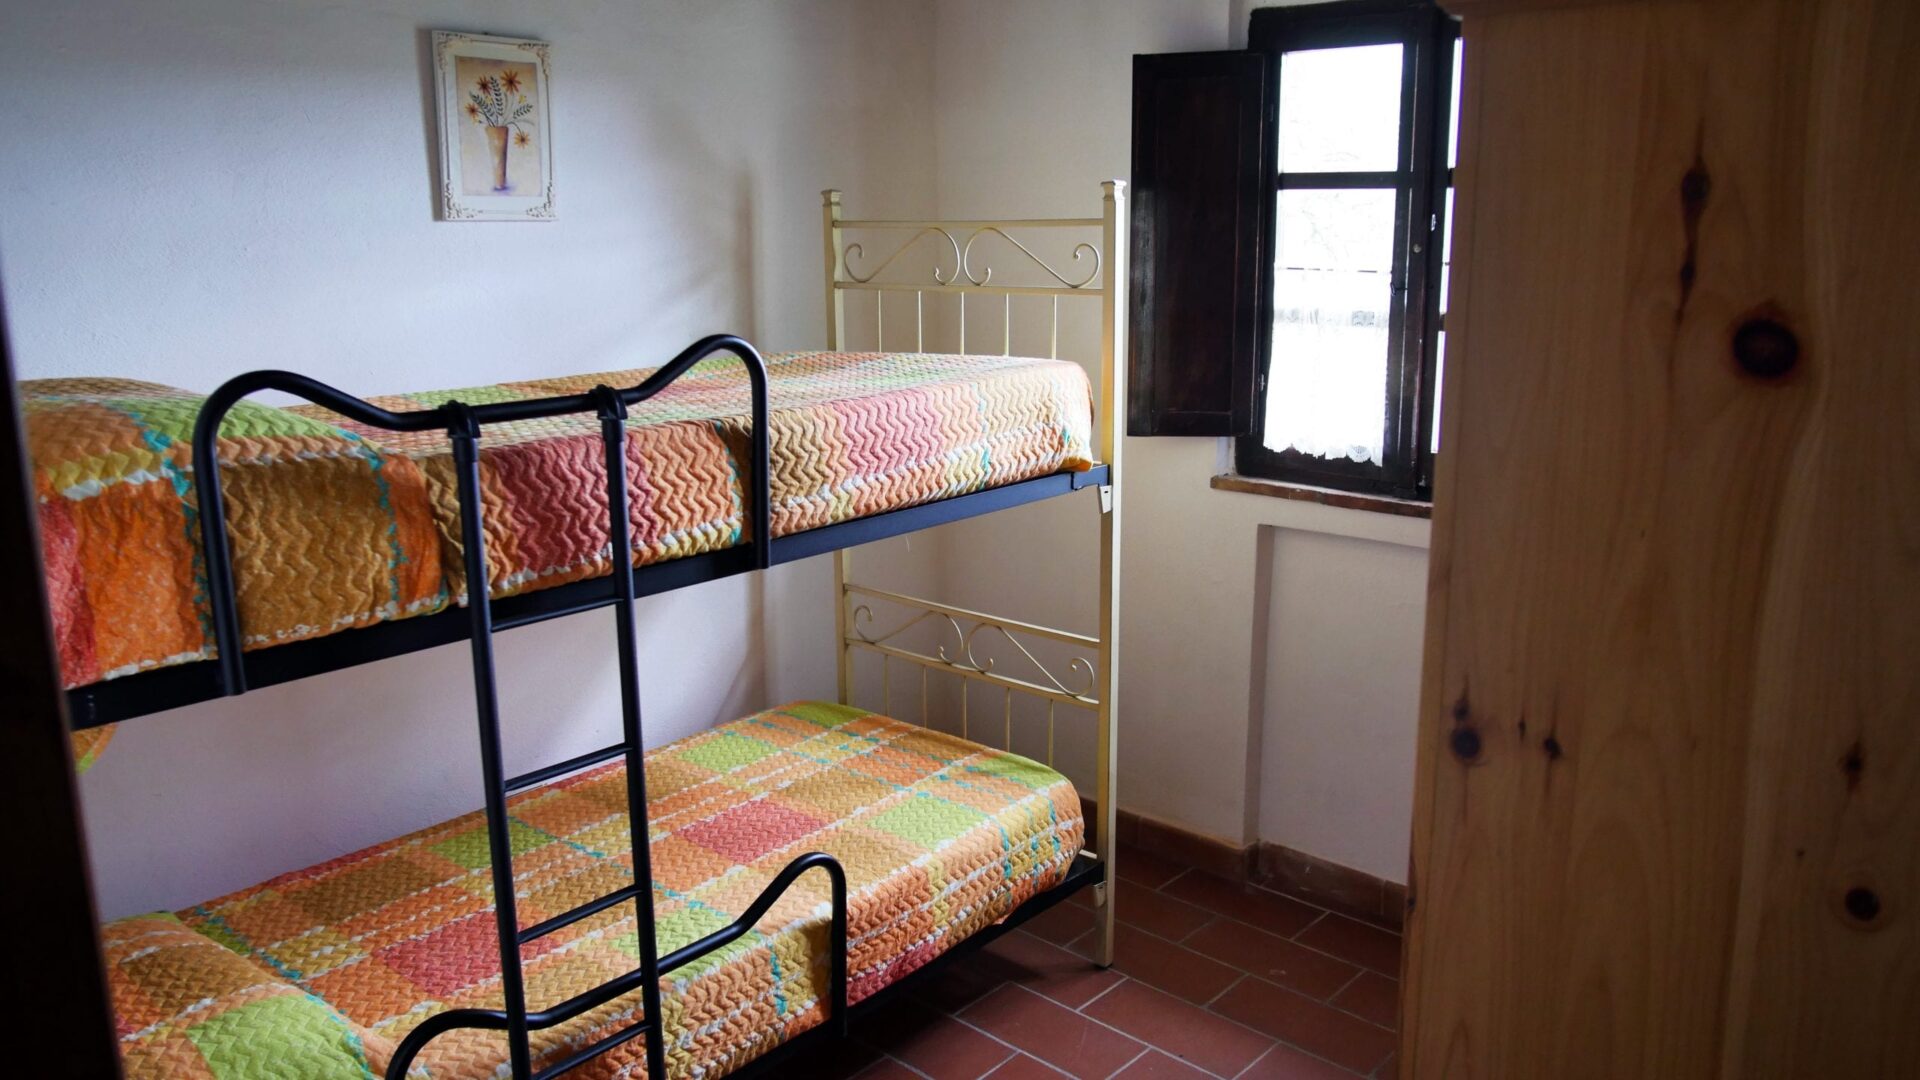 A room with two bunk beds and a window.